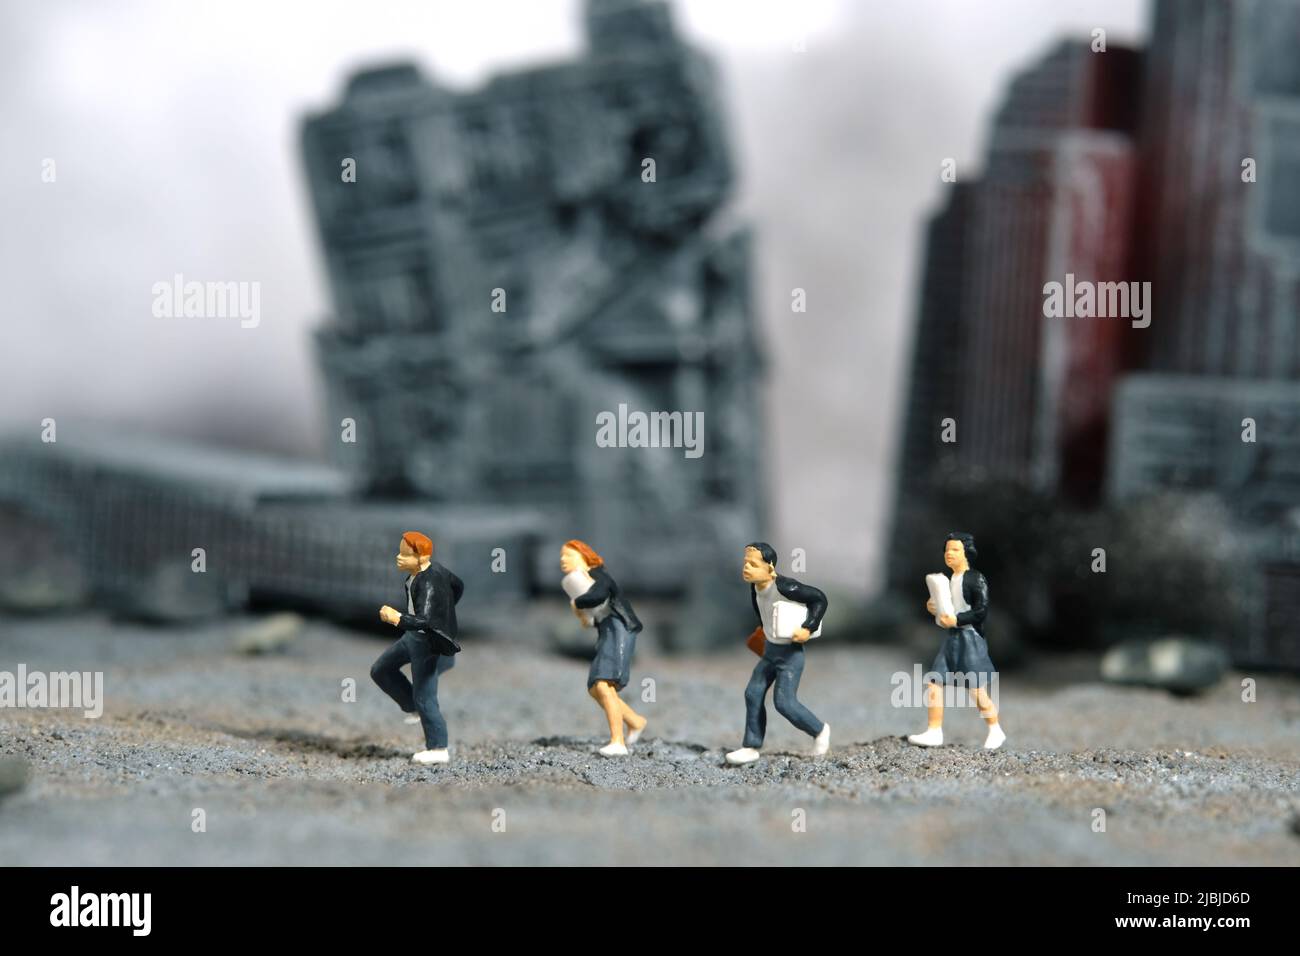 Miniature people toy figure photography. School education for students in conflict areas concept. Pupils running on ruined demolished city diorama bac Stock Photo